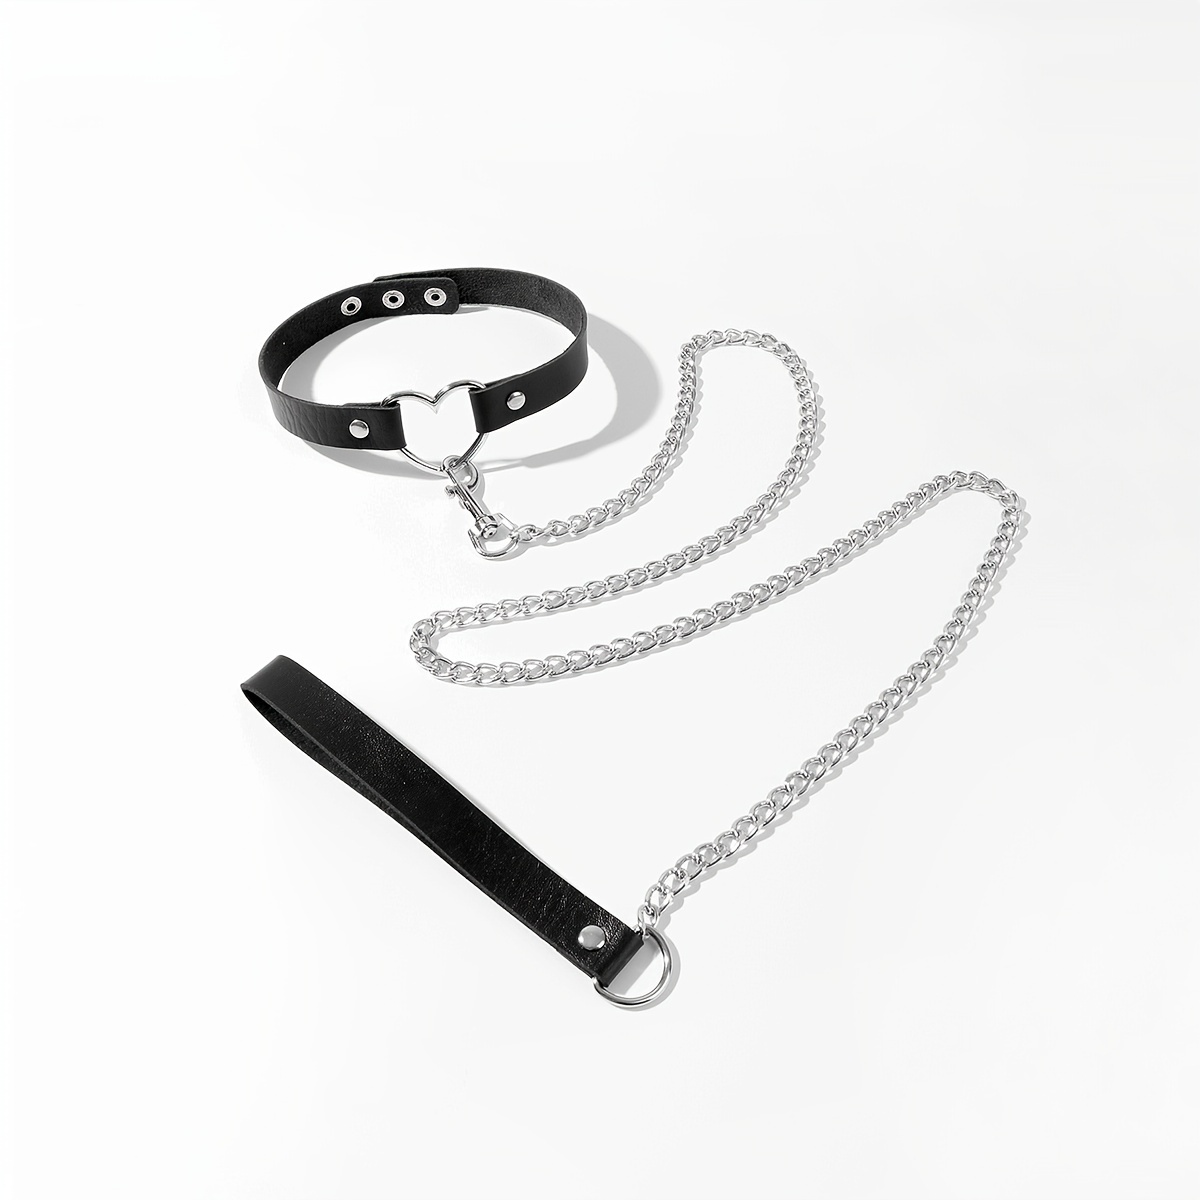  SM Nipple Clamps Neck Collar & Adjustable Male Cock Ties & 6  Different Sizes Cock Ring Sets : Health & Household